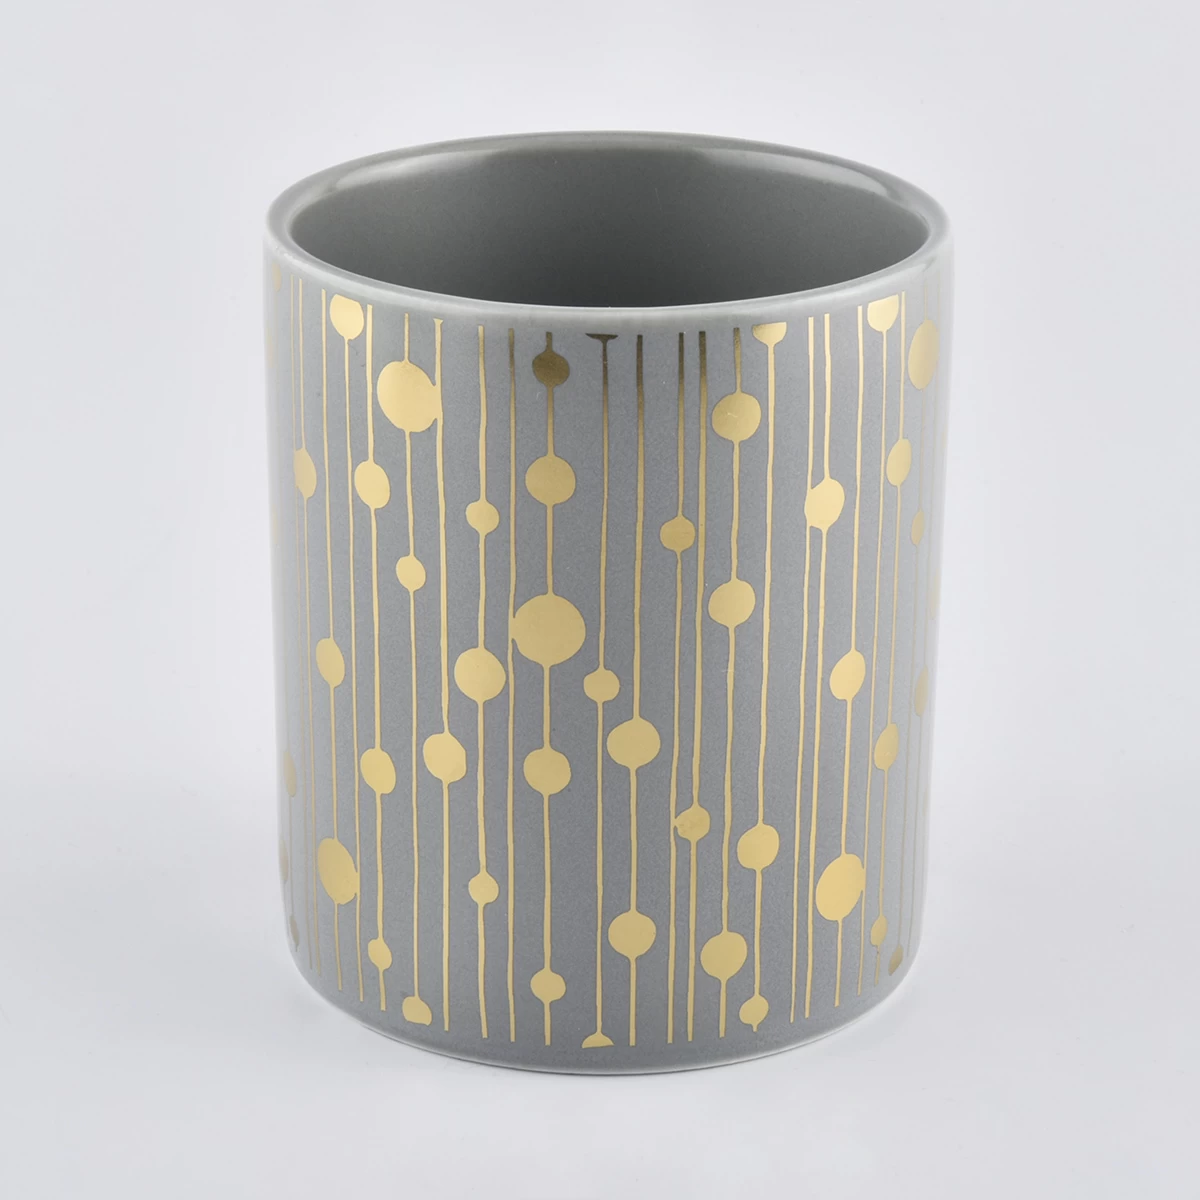 12 oz ceramic candle vessels with gold pattern, unique ceramic candle vessel for candle making